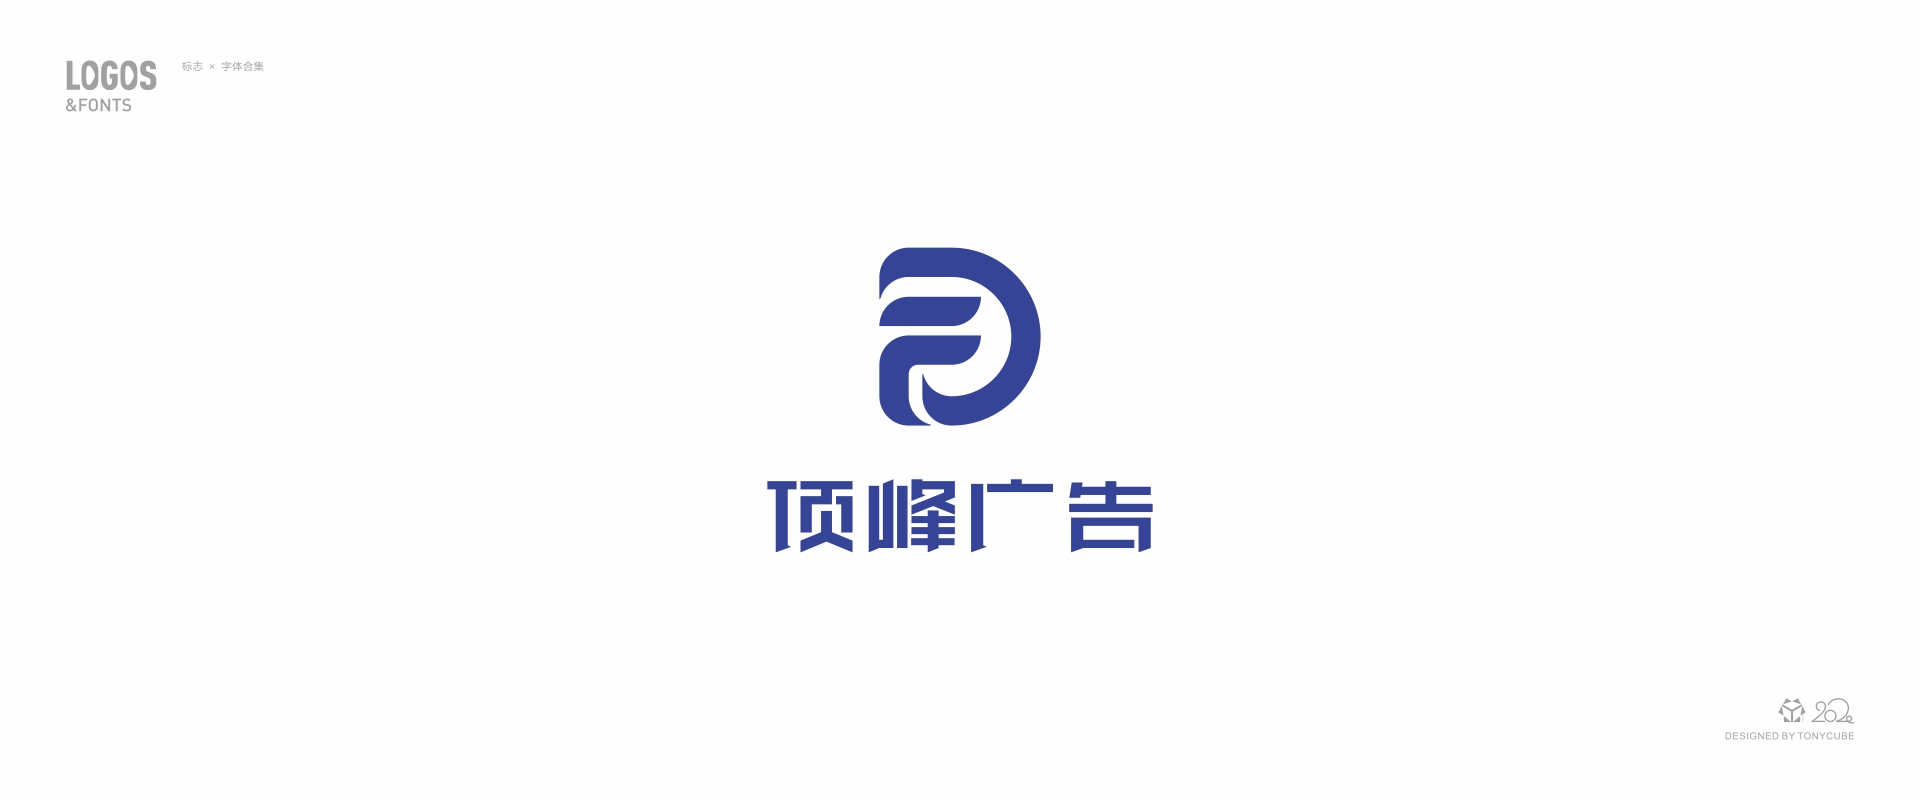 32P The ingenious combination of creative Chinese characters and logo